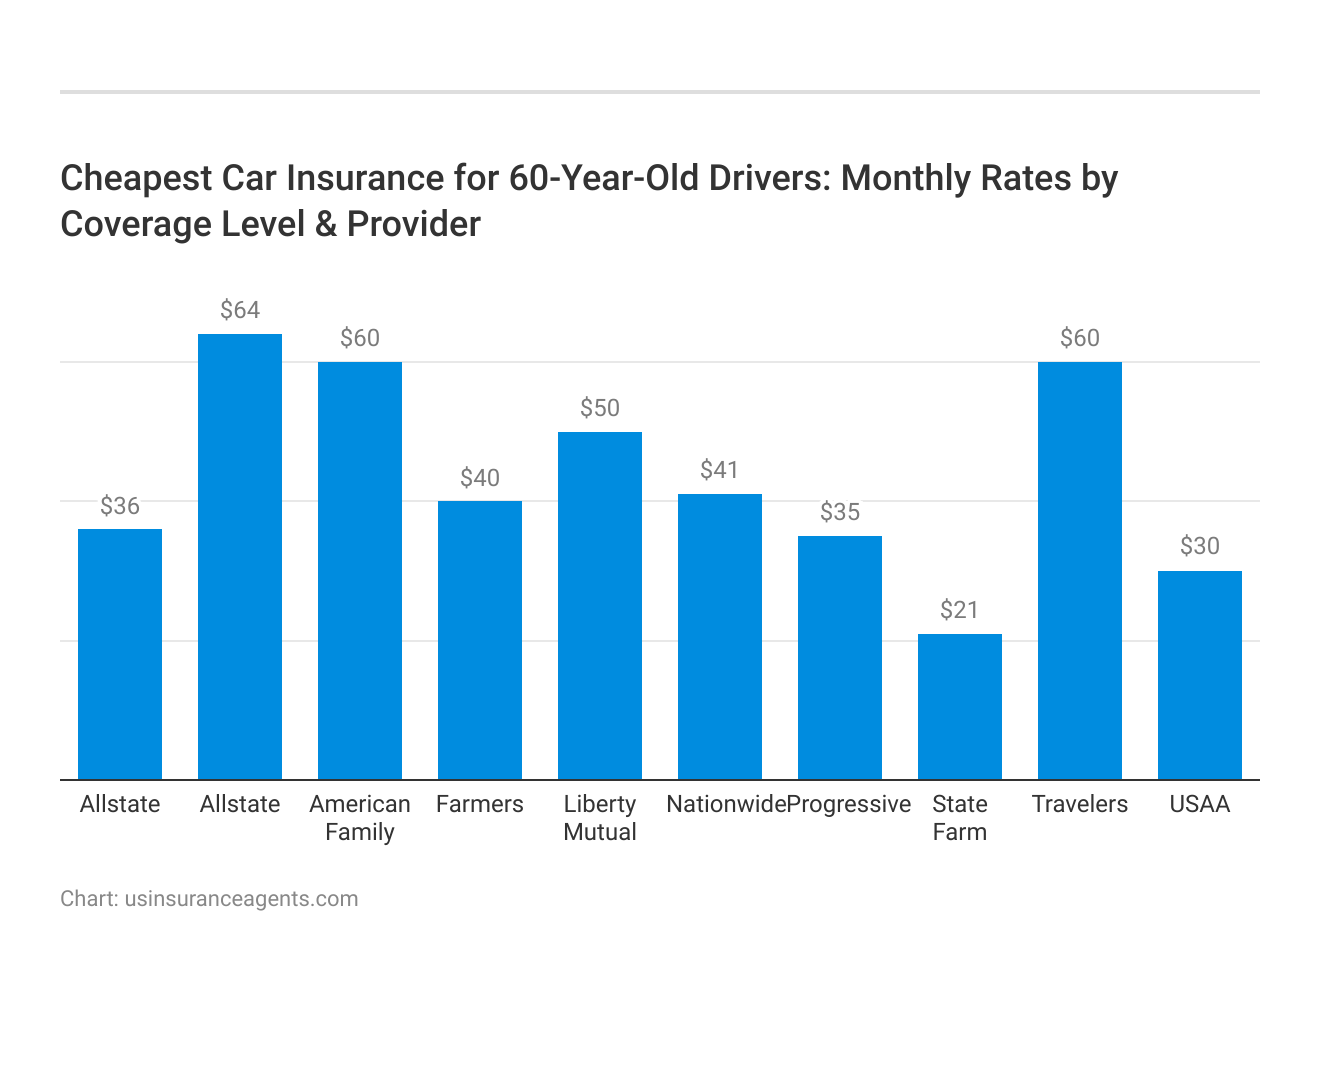 <h3>Cheapest Car Insurance for 60-Year-Old Drivers: Monthly Rates by Coverage Level & Provider</h3>